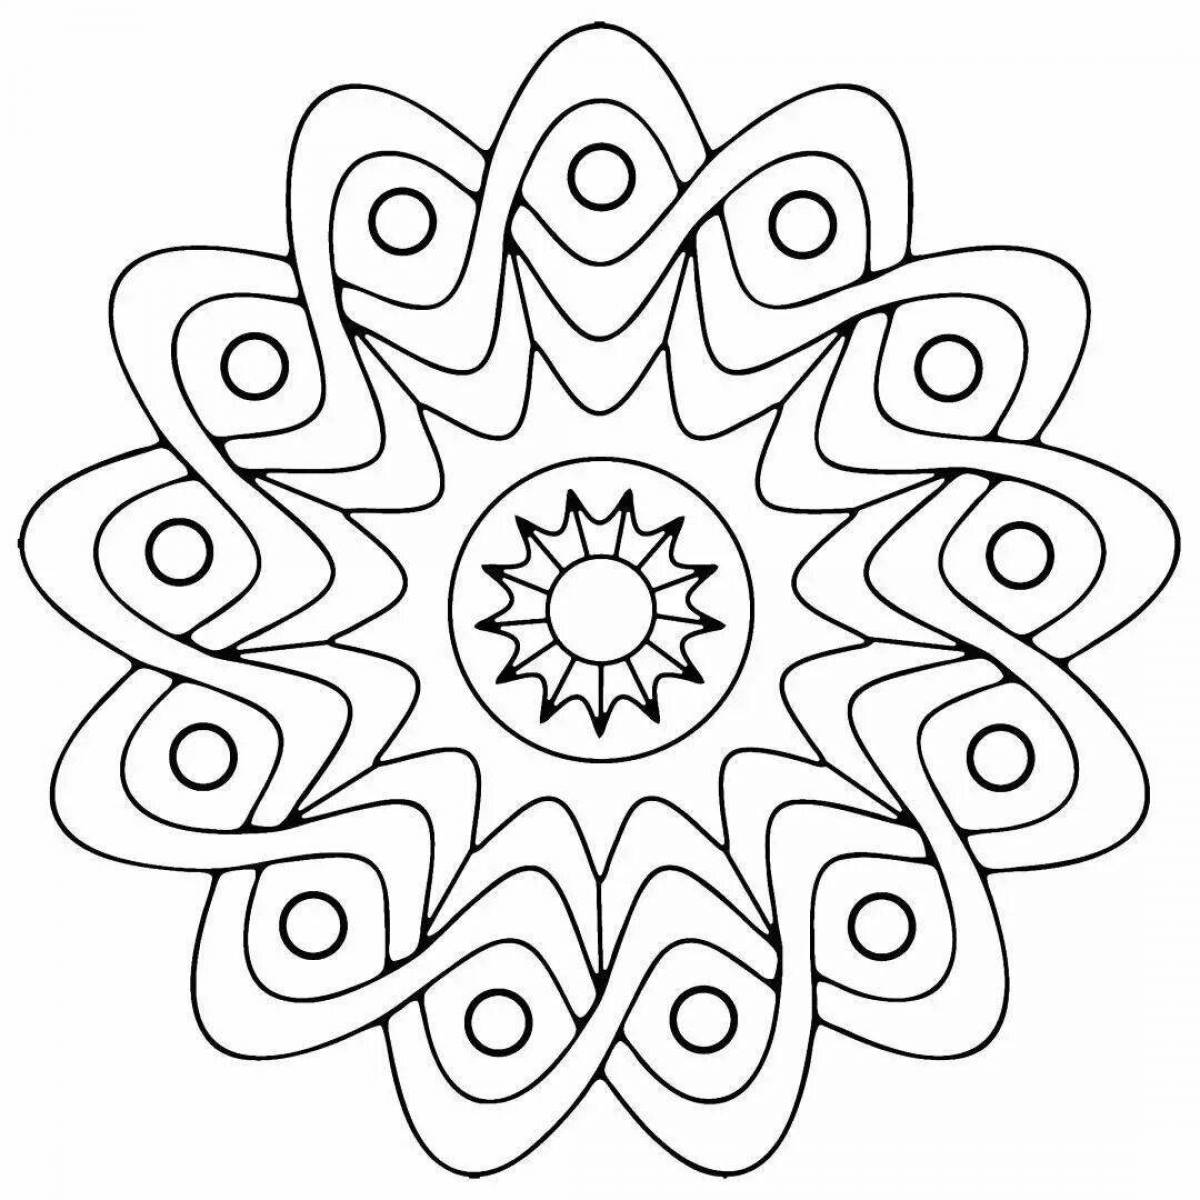 Floral patterns and ornaments for coloring pages